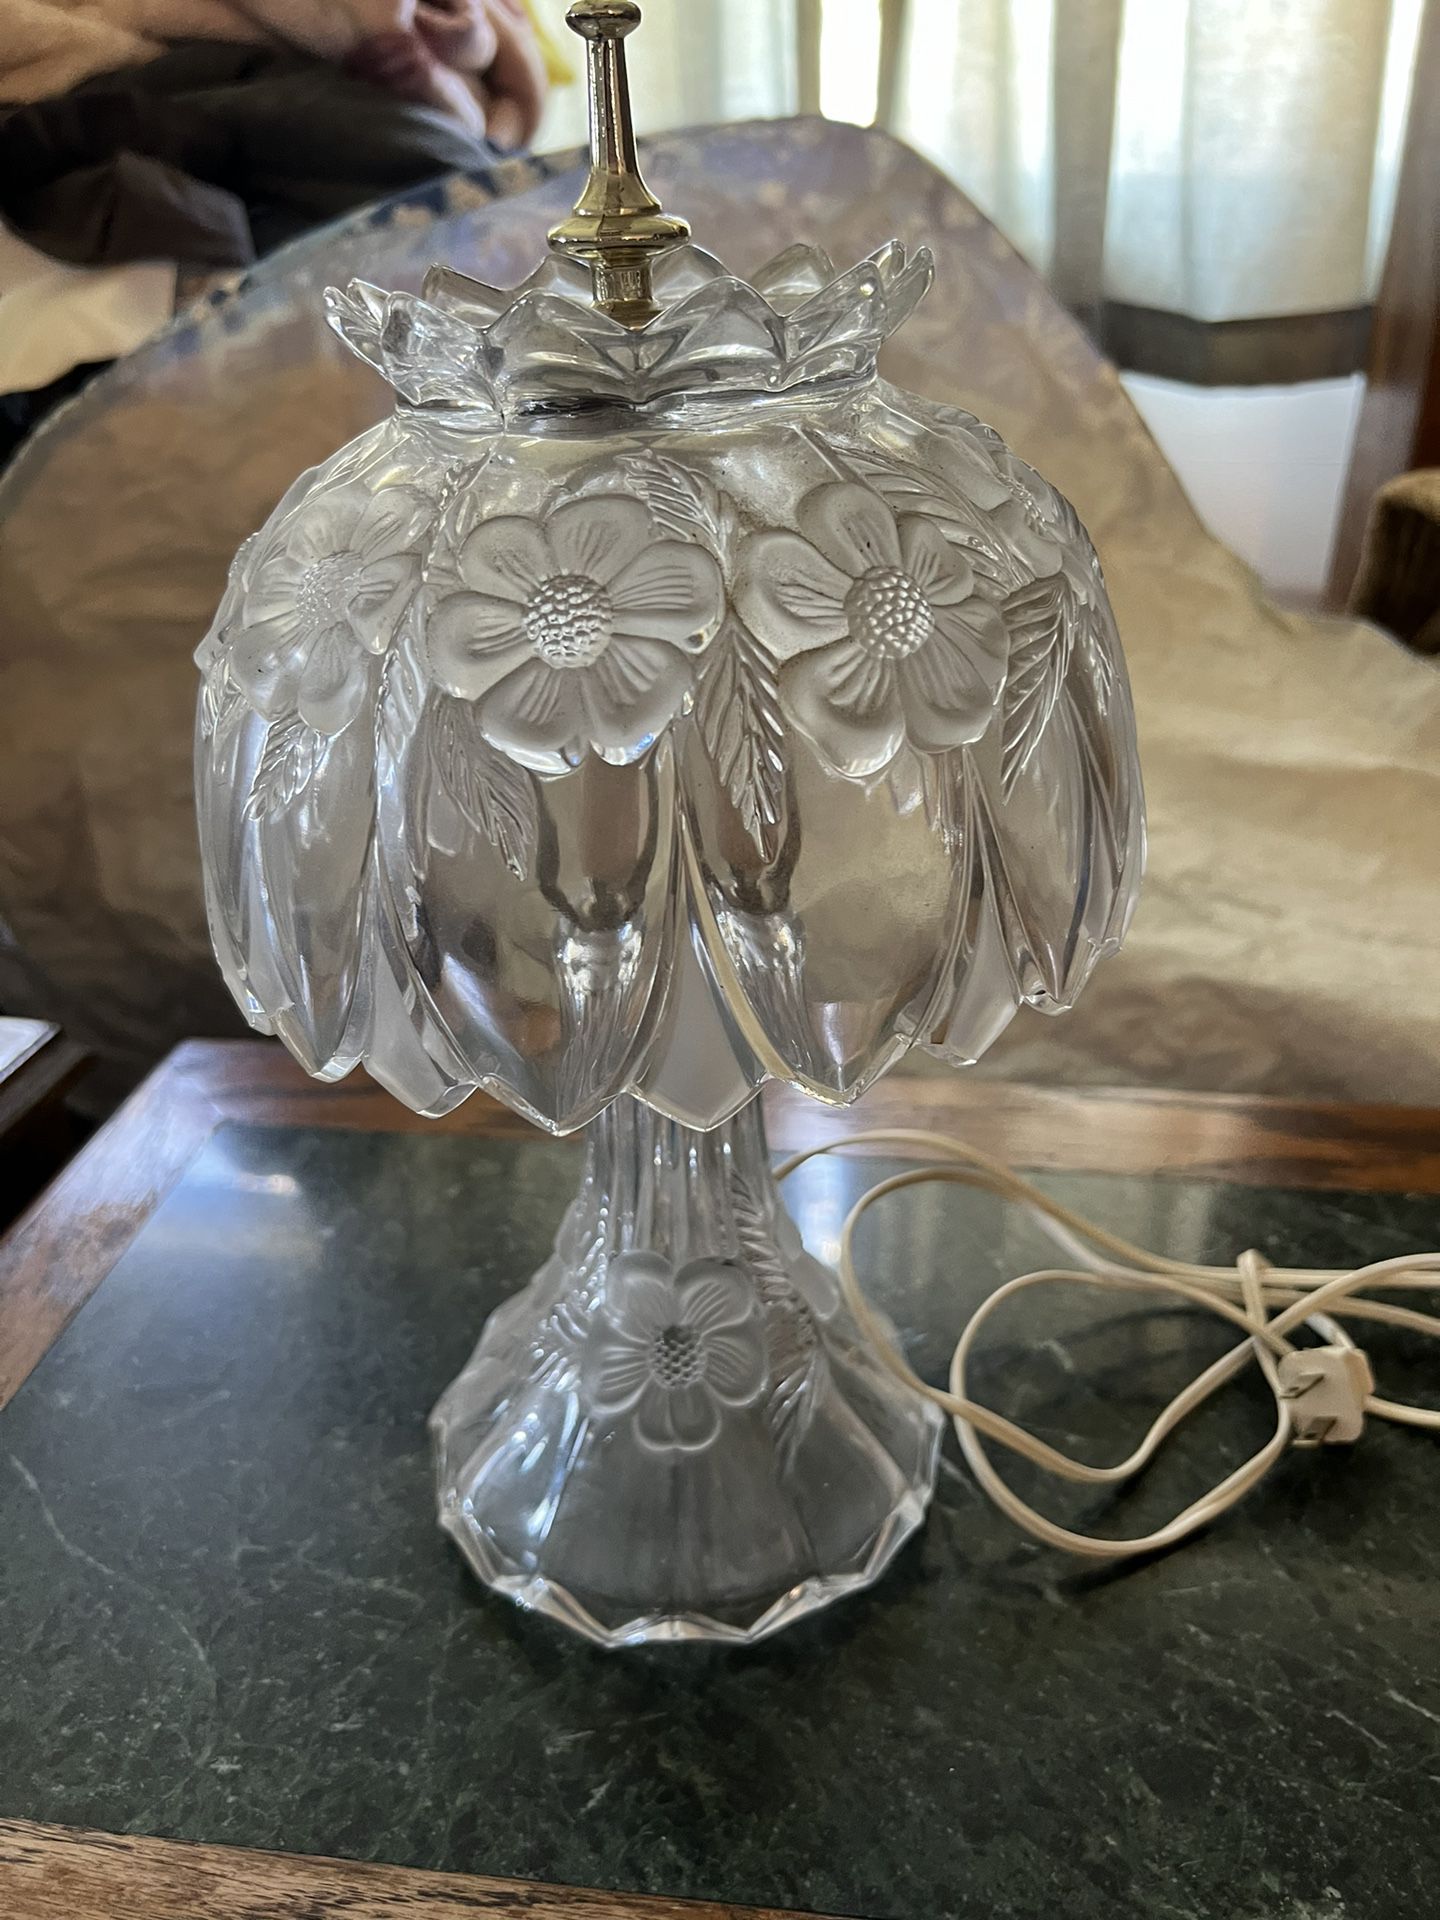 BEAUTIFUL VINTAGE CRYSTAL BOUDOIR TABLE DESK LAMP FROSTED FLORAL DESIGN SHADE